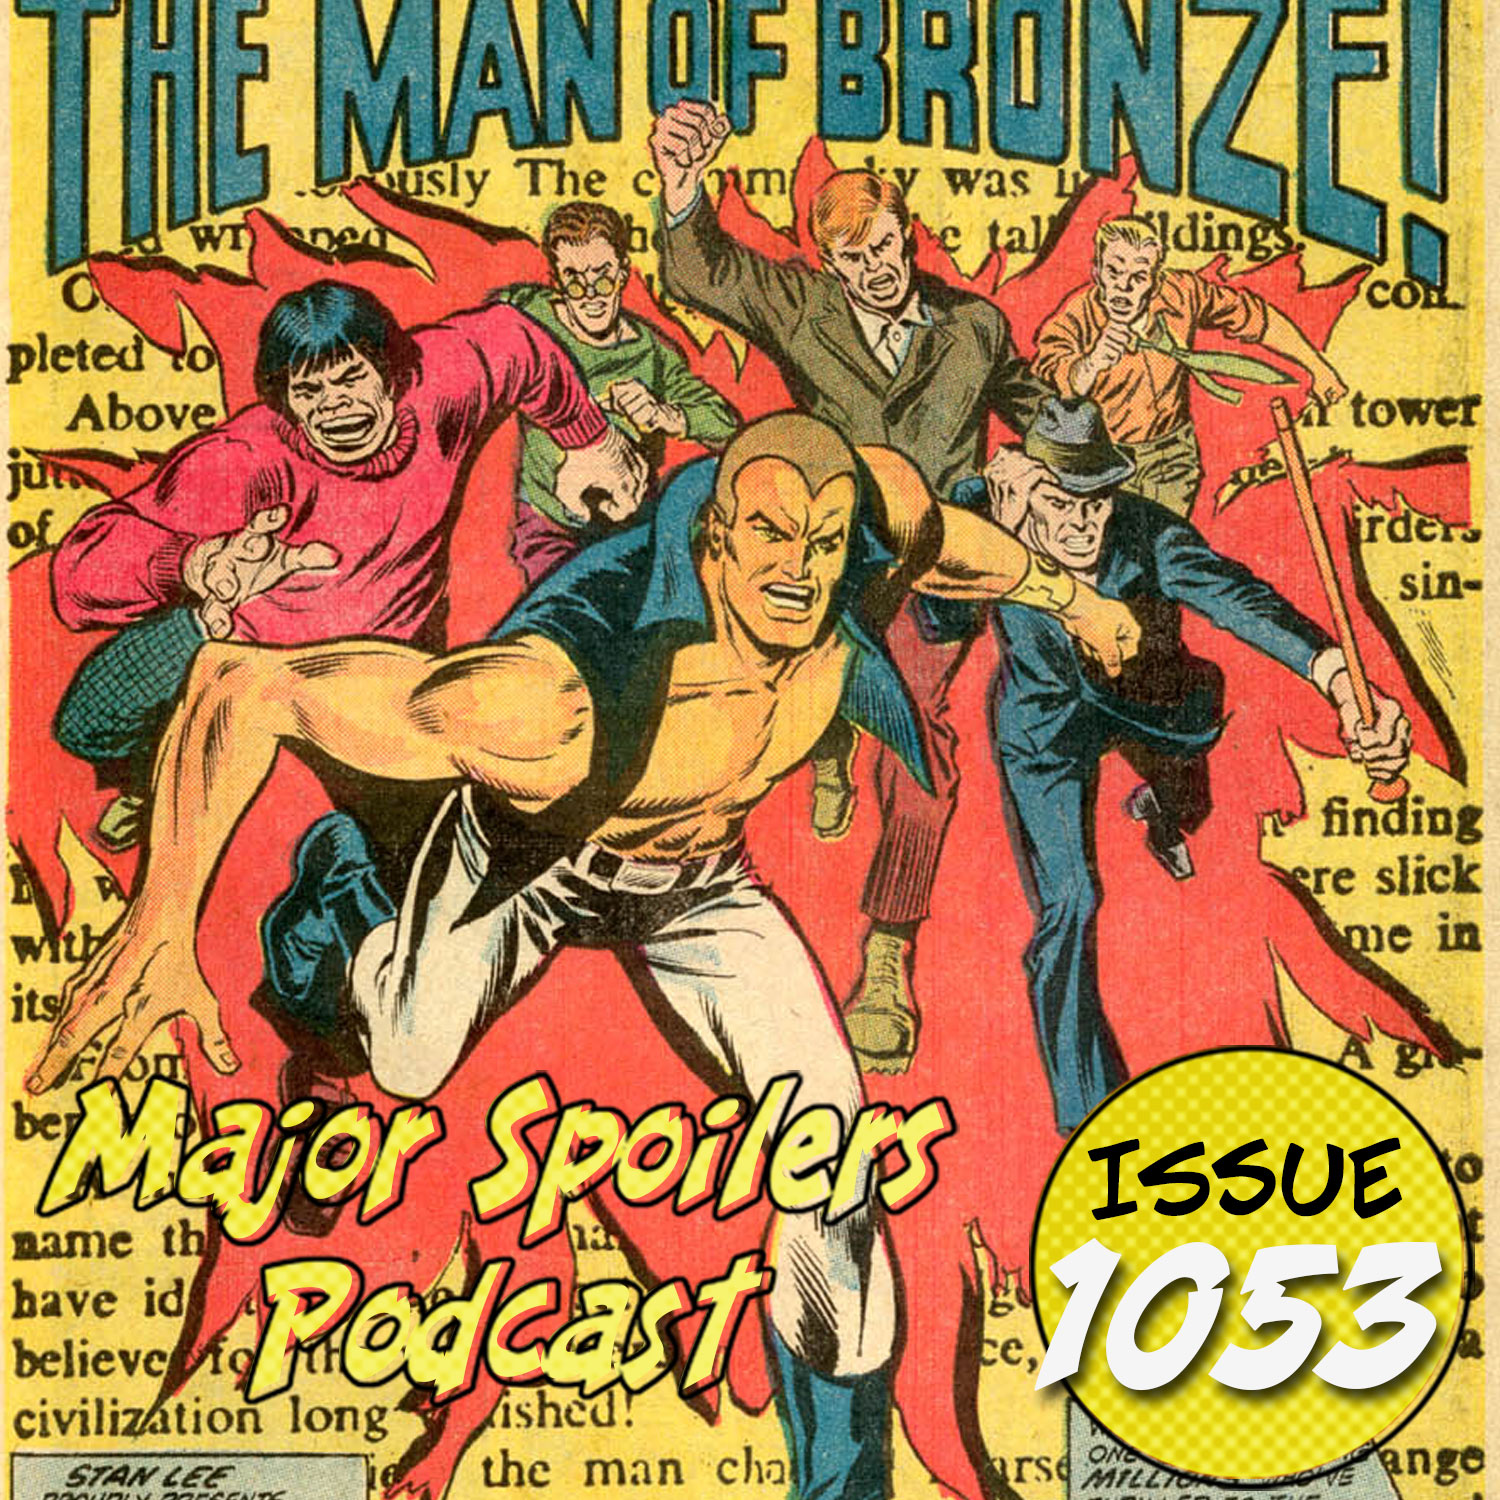 Major Spoilers Podcast #1053: The Doc Savage Podcast